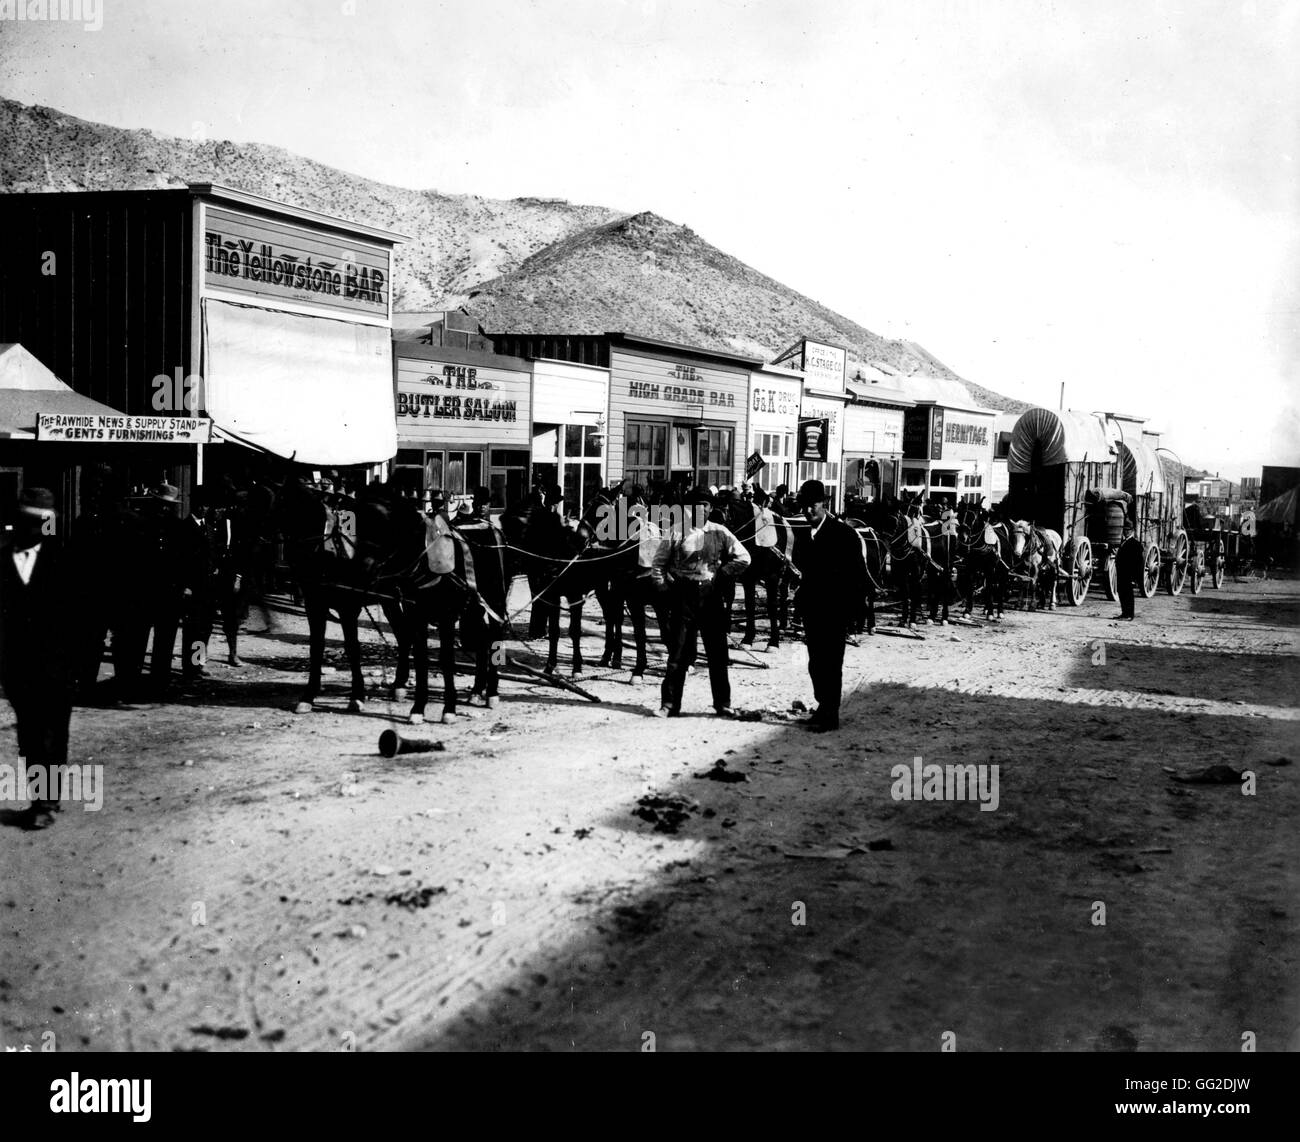 The Conquest of the West: A street in Rawhide, Nevada 1908 United States Washington. Library of Congress Stock Photo